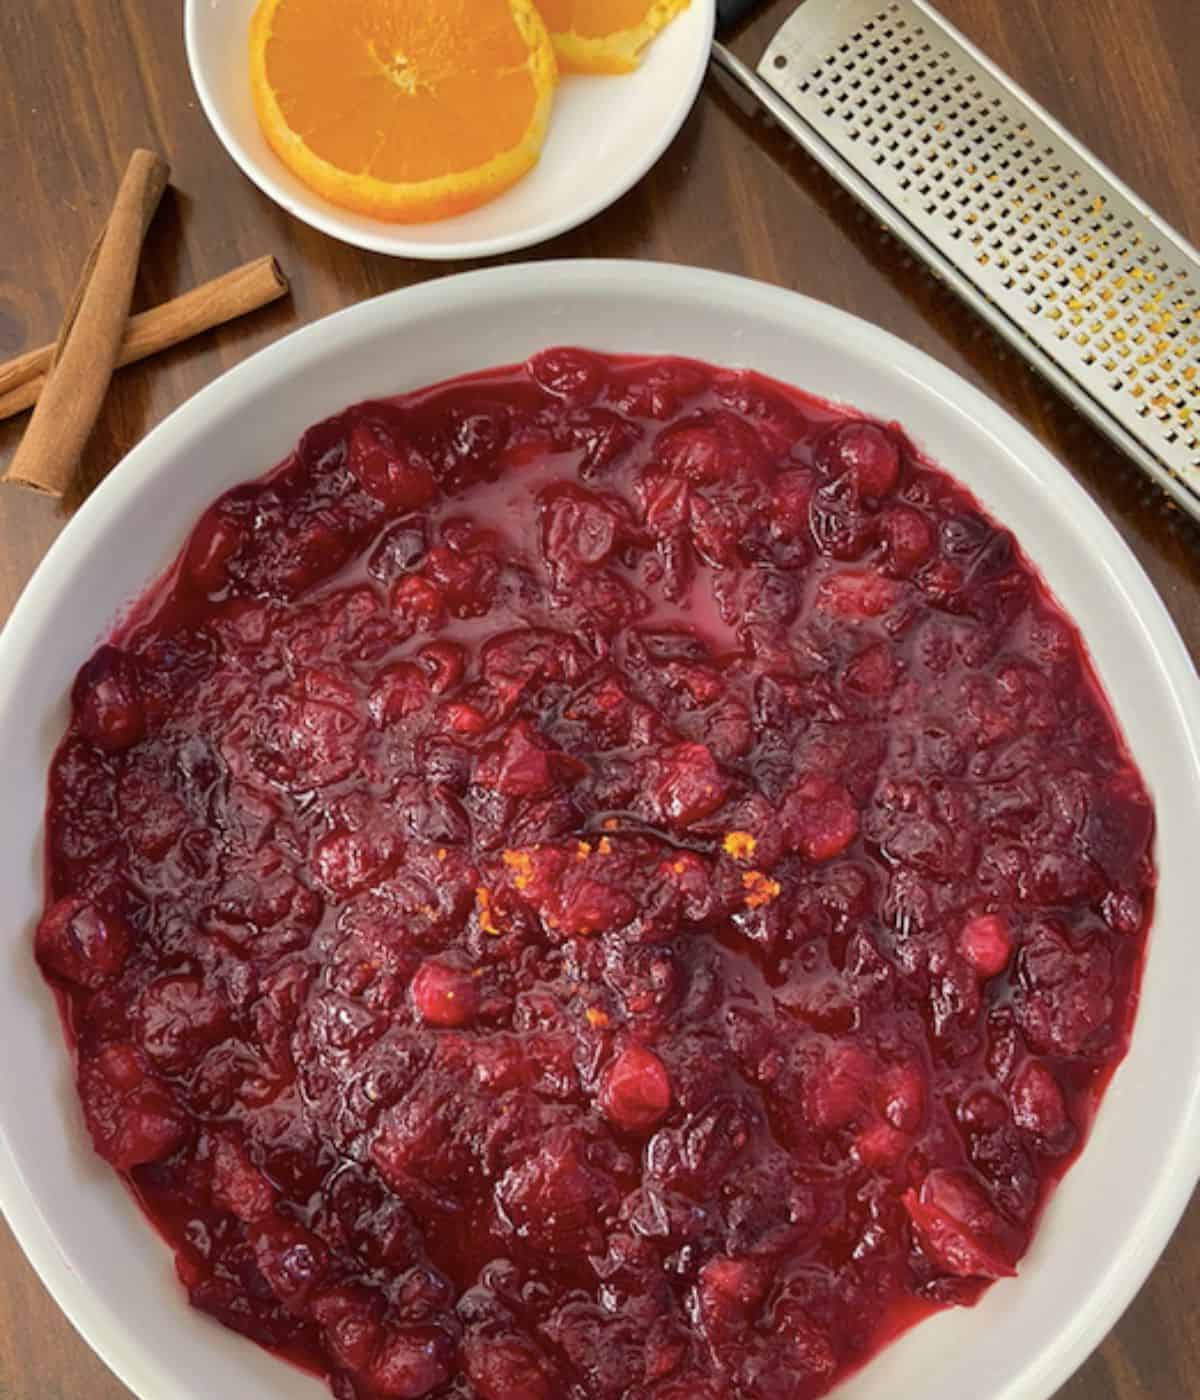 large bowl of cranberry sauce with orange slices on the side and cinnamon sticks